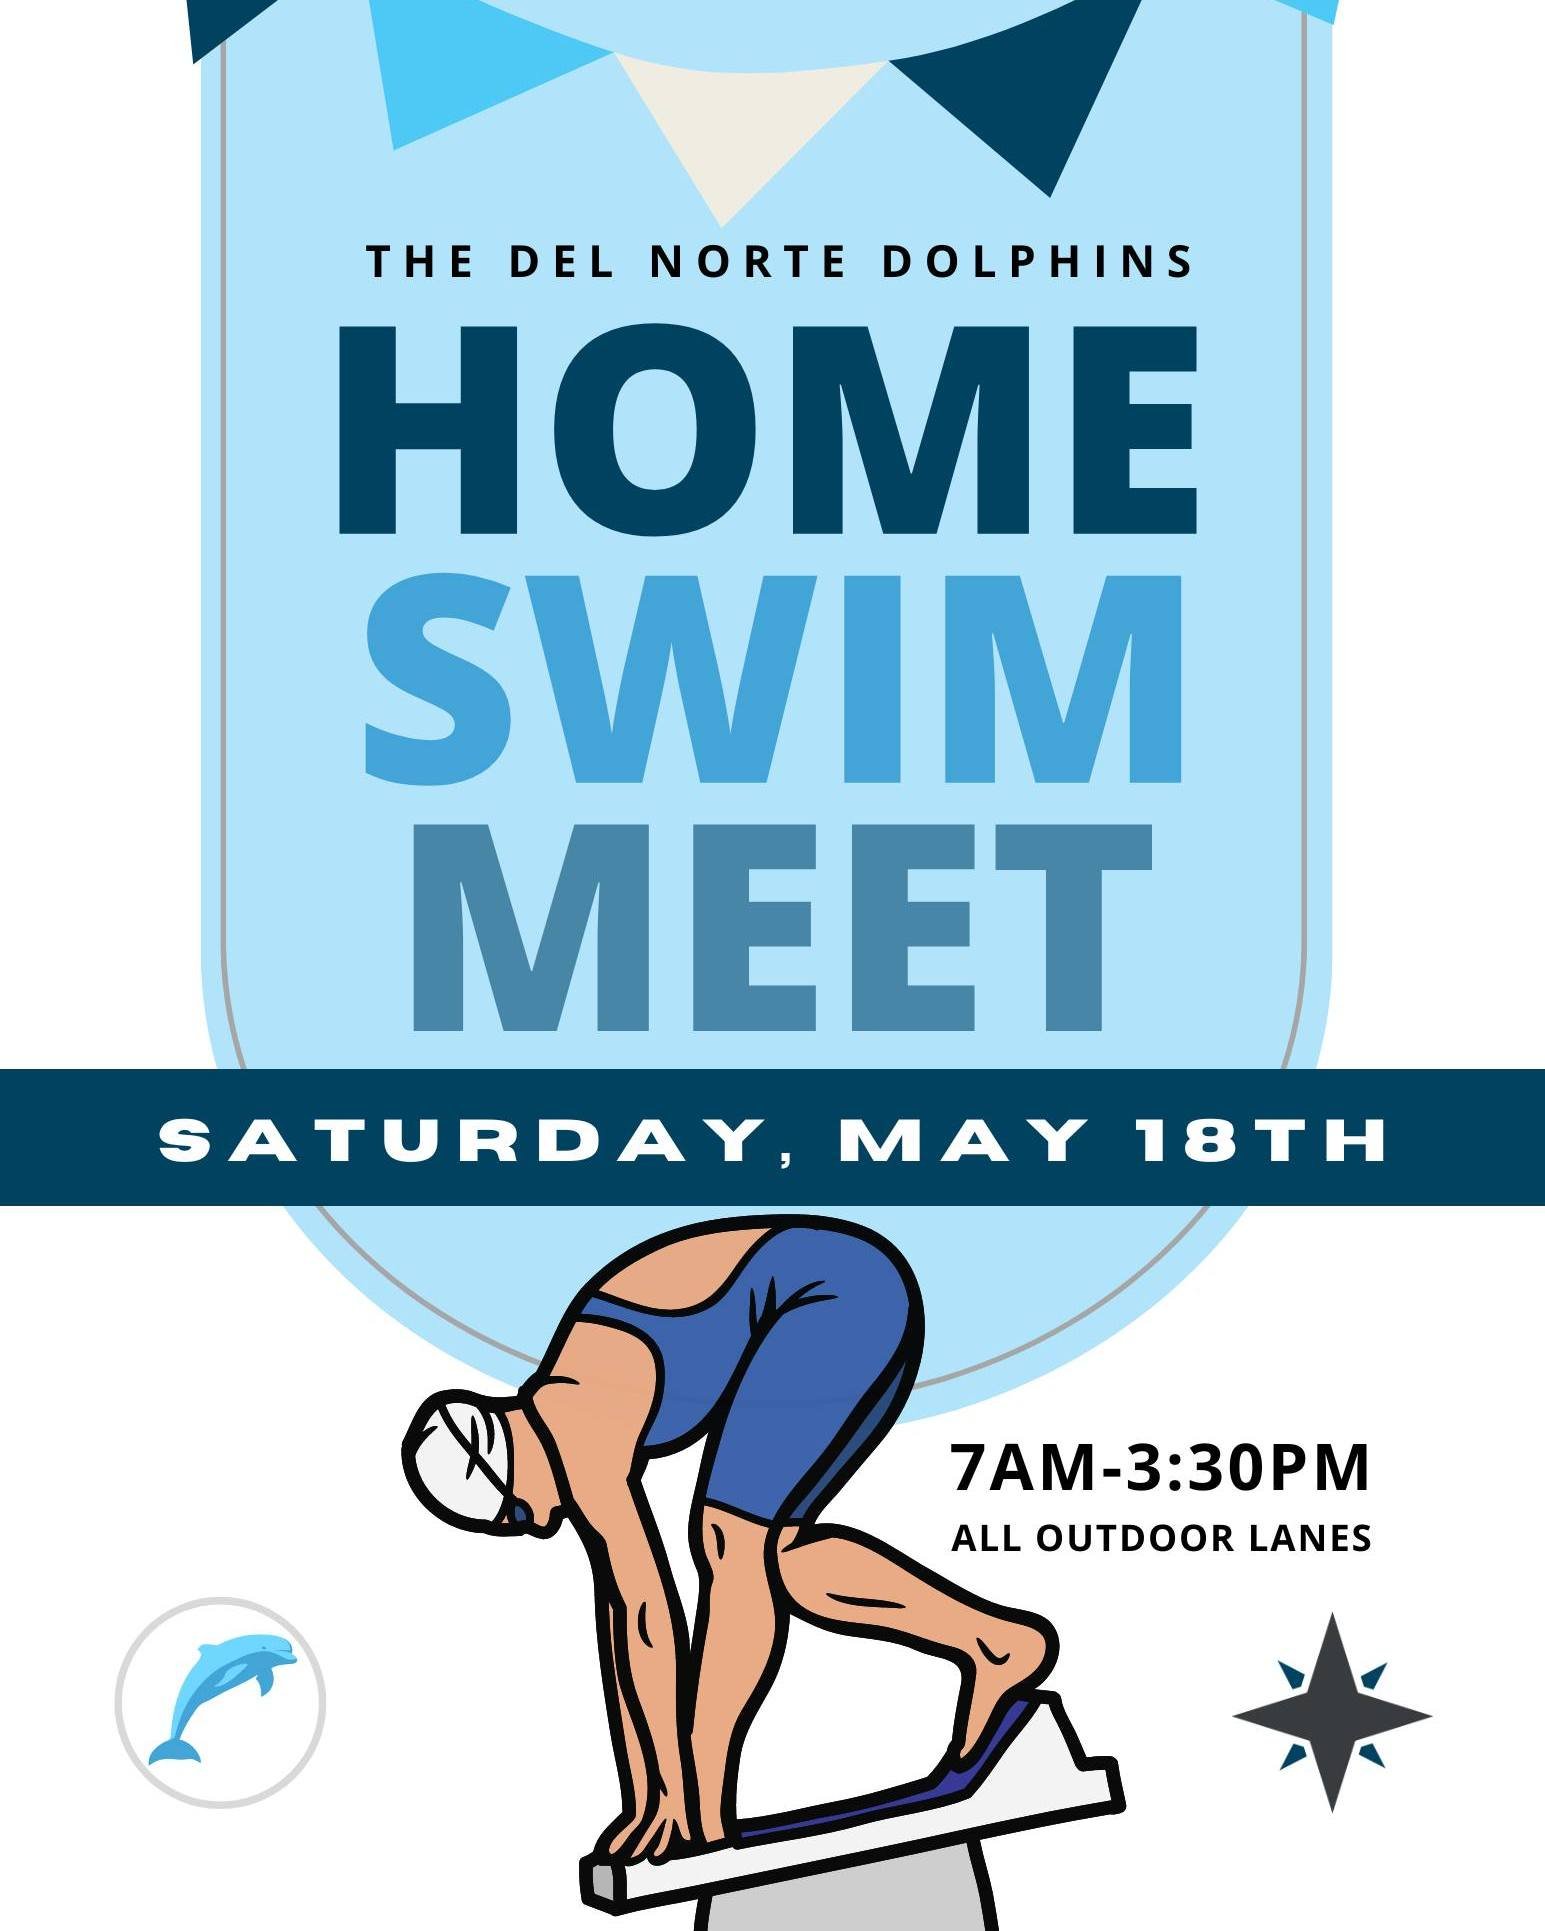 The Dolphin's first home swim meet of the season is this Saturday the 18th from 7am-3:30pm. All of the outdoor pool lanes will be dedicated to the swim meet. Expect more people on campus during the event. Good luck to all our swimmers. Go Dolphins!